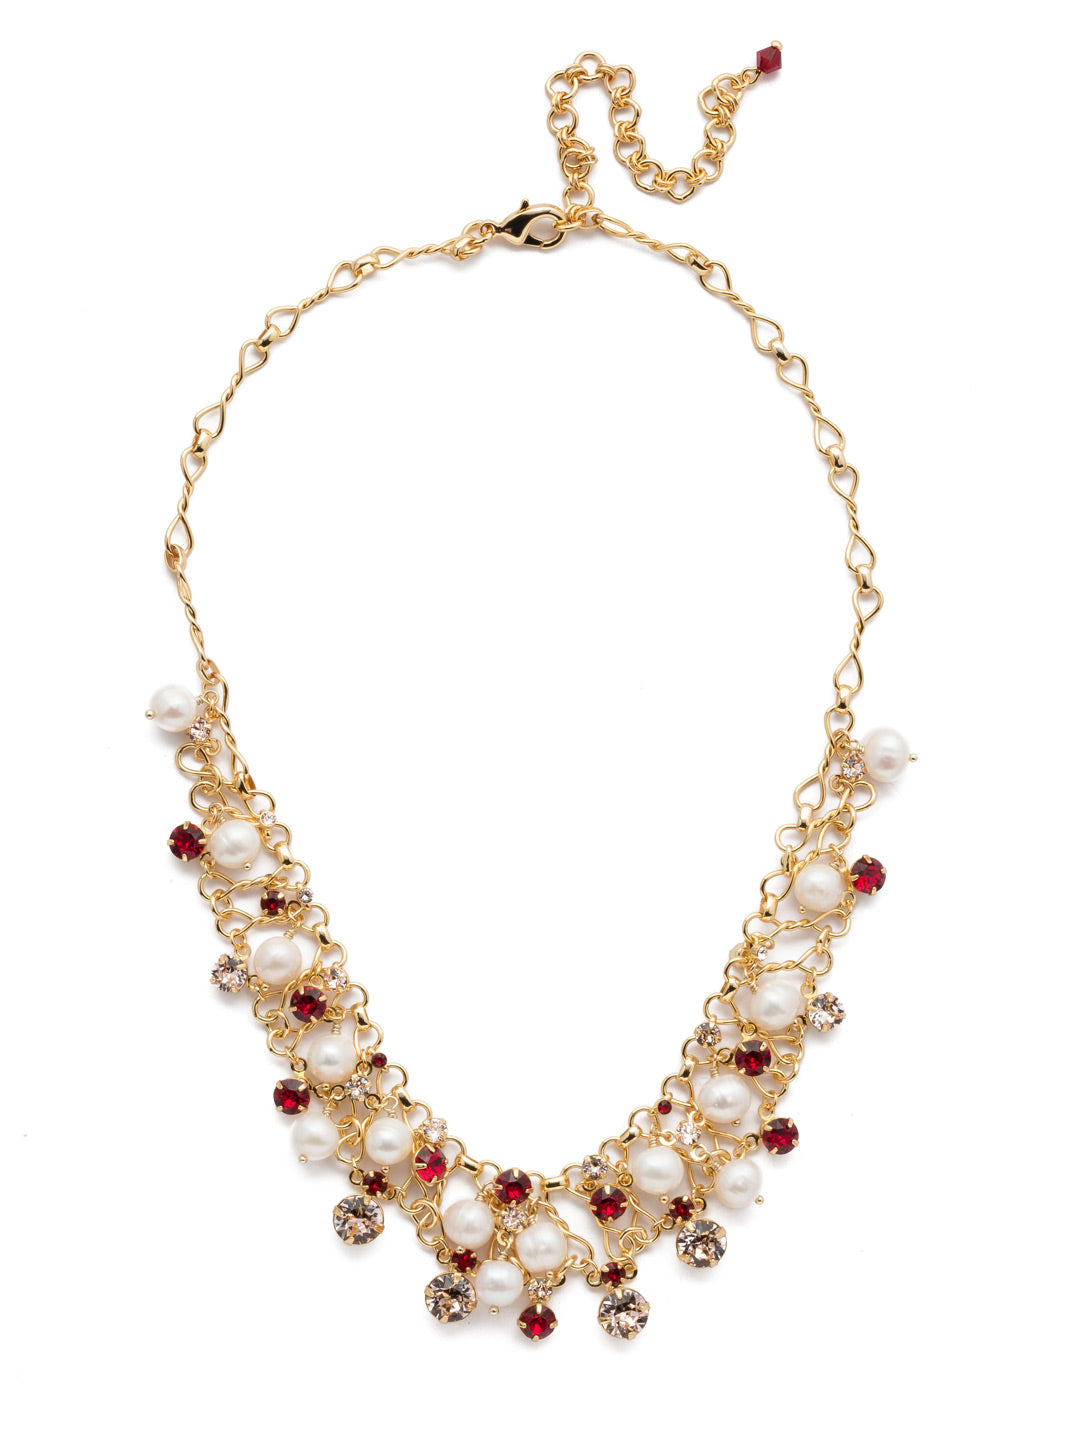 Clustered Crystal and Bead Tennis Necklace - NCF5BGSRC